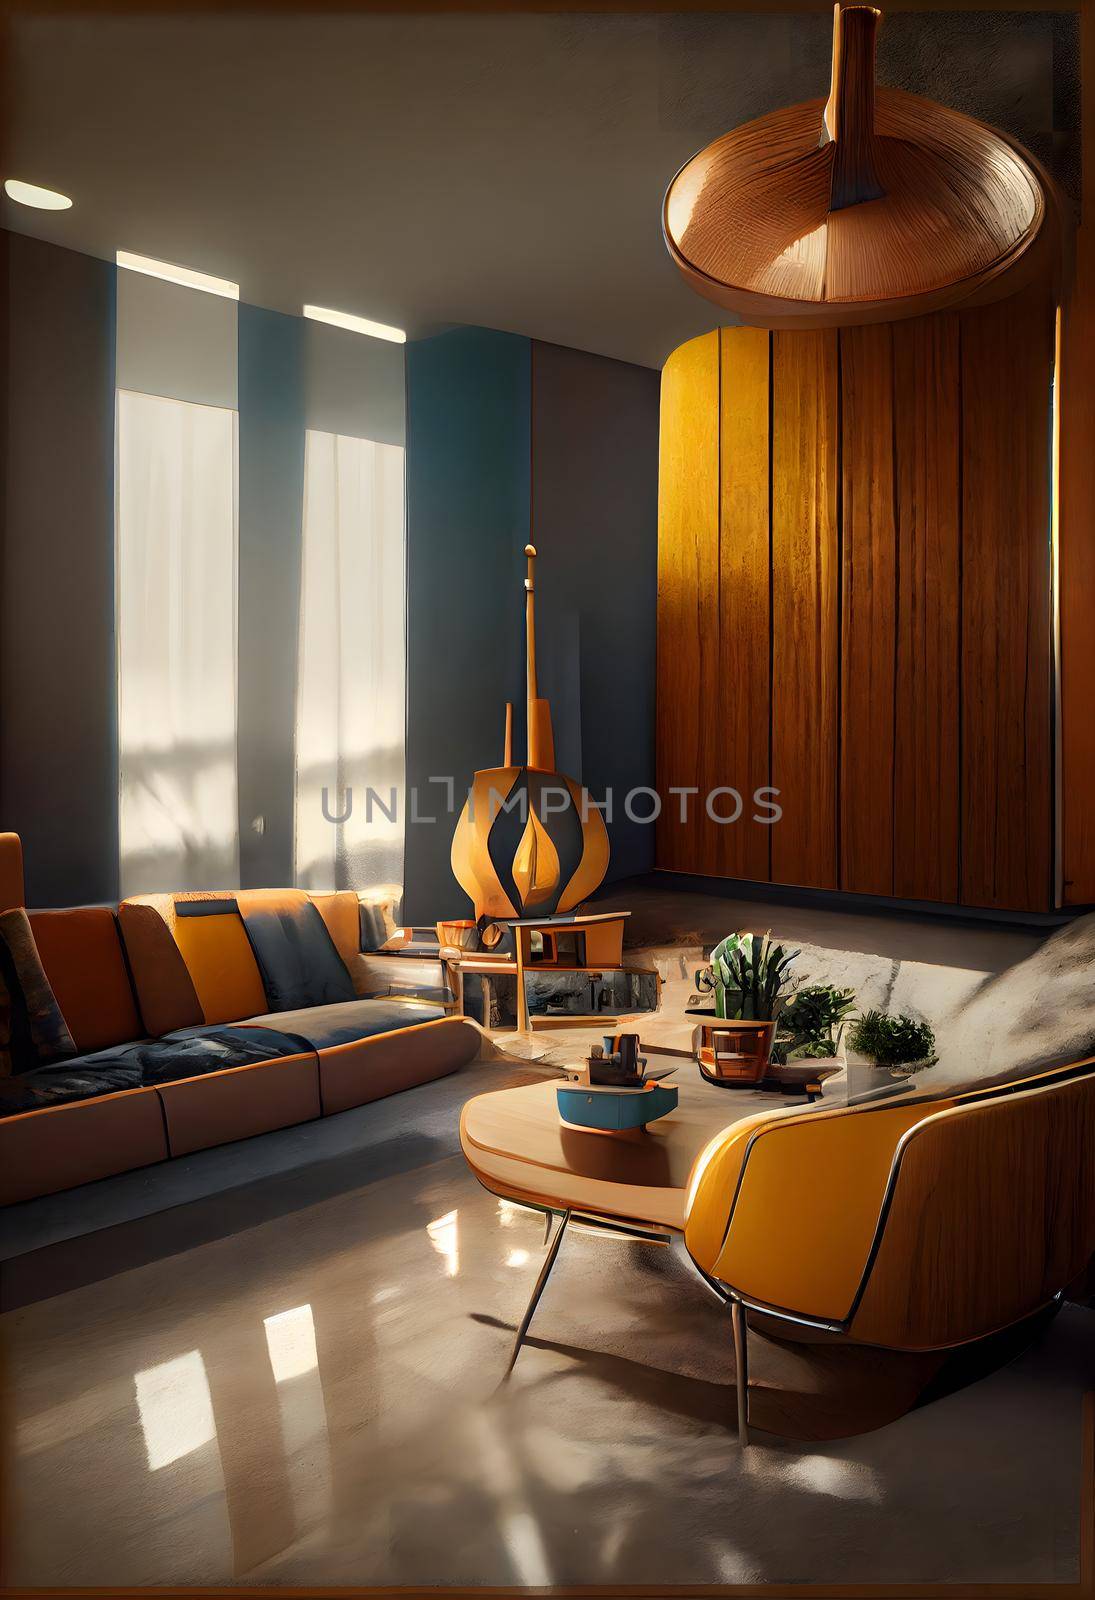 mid century modern style interior, neural network generated art. Digitally generated image. Not based on any actual scene or pattern.